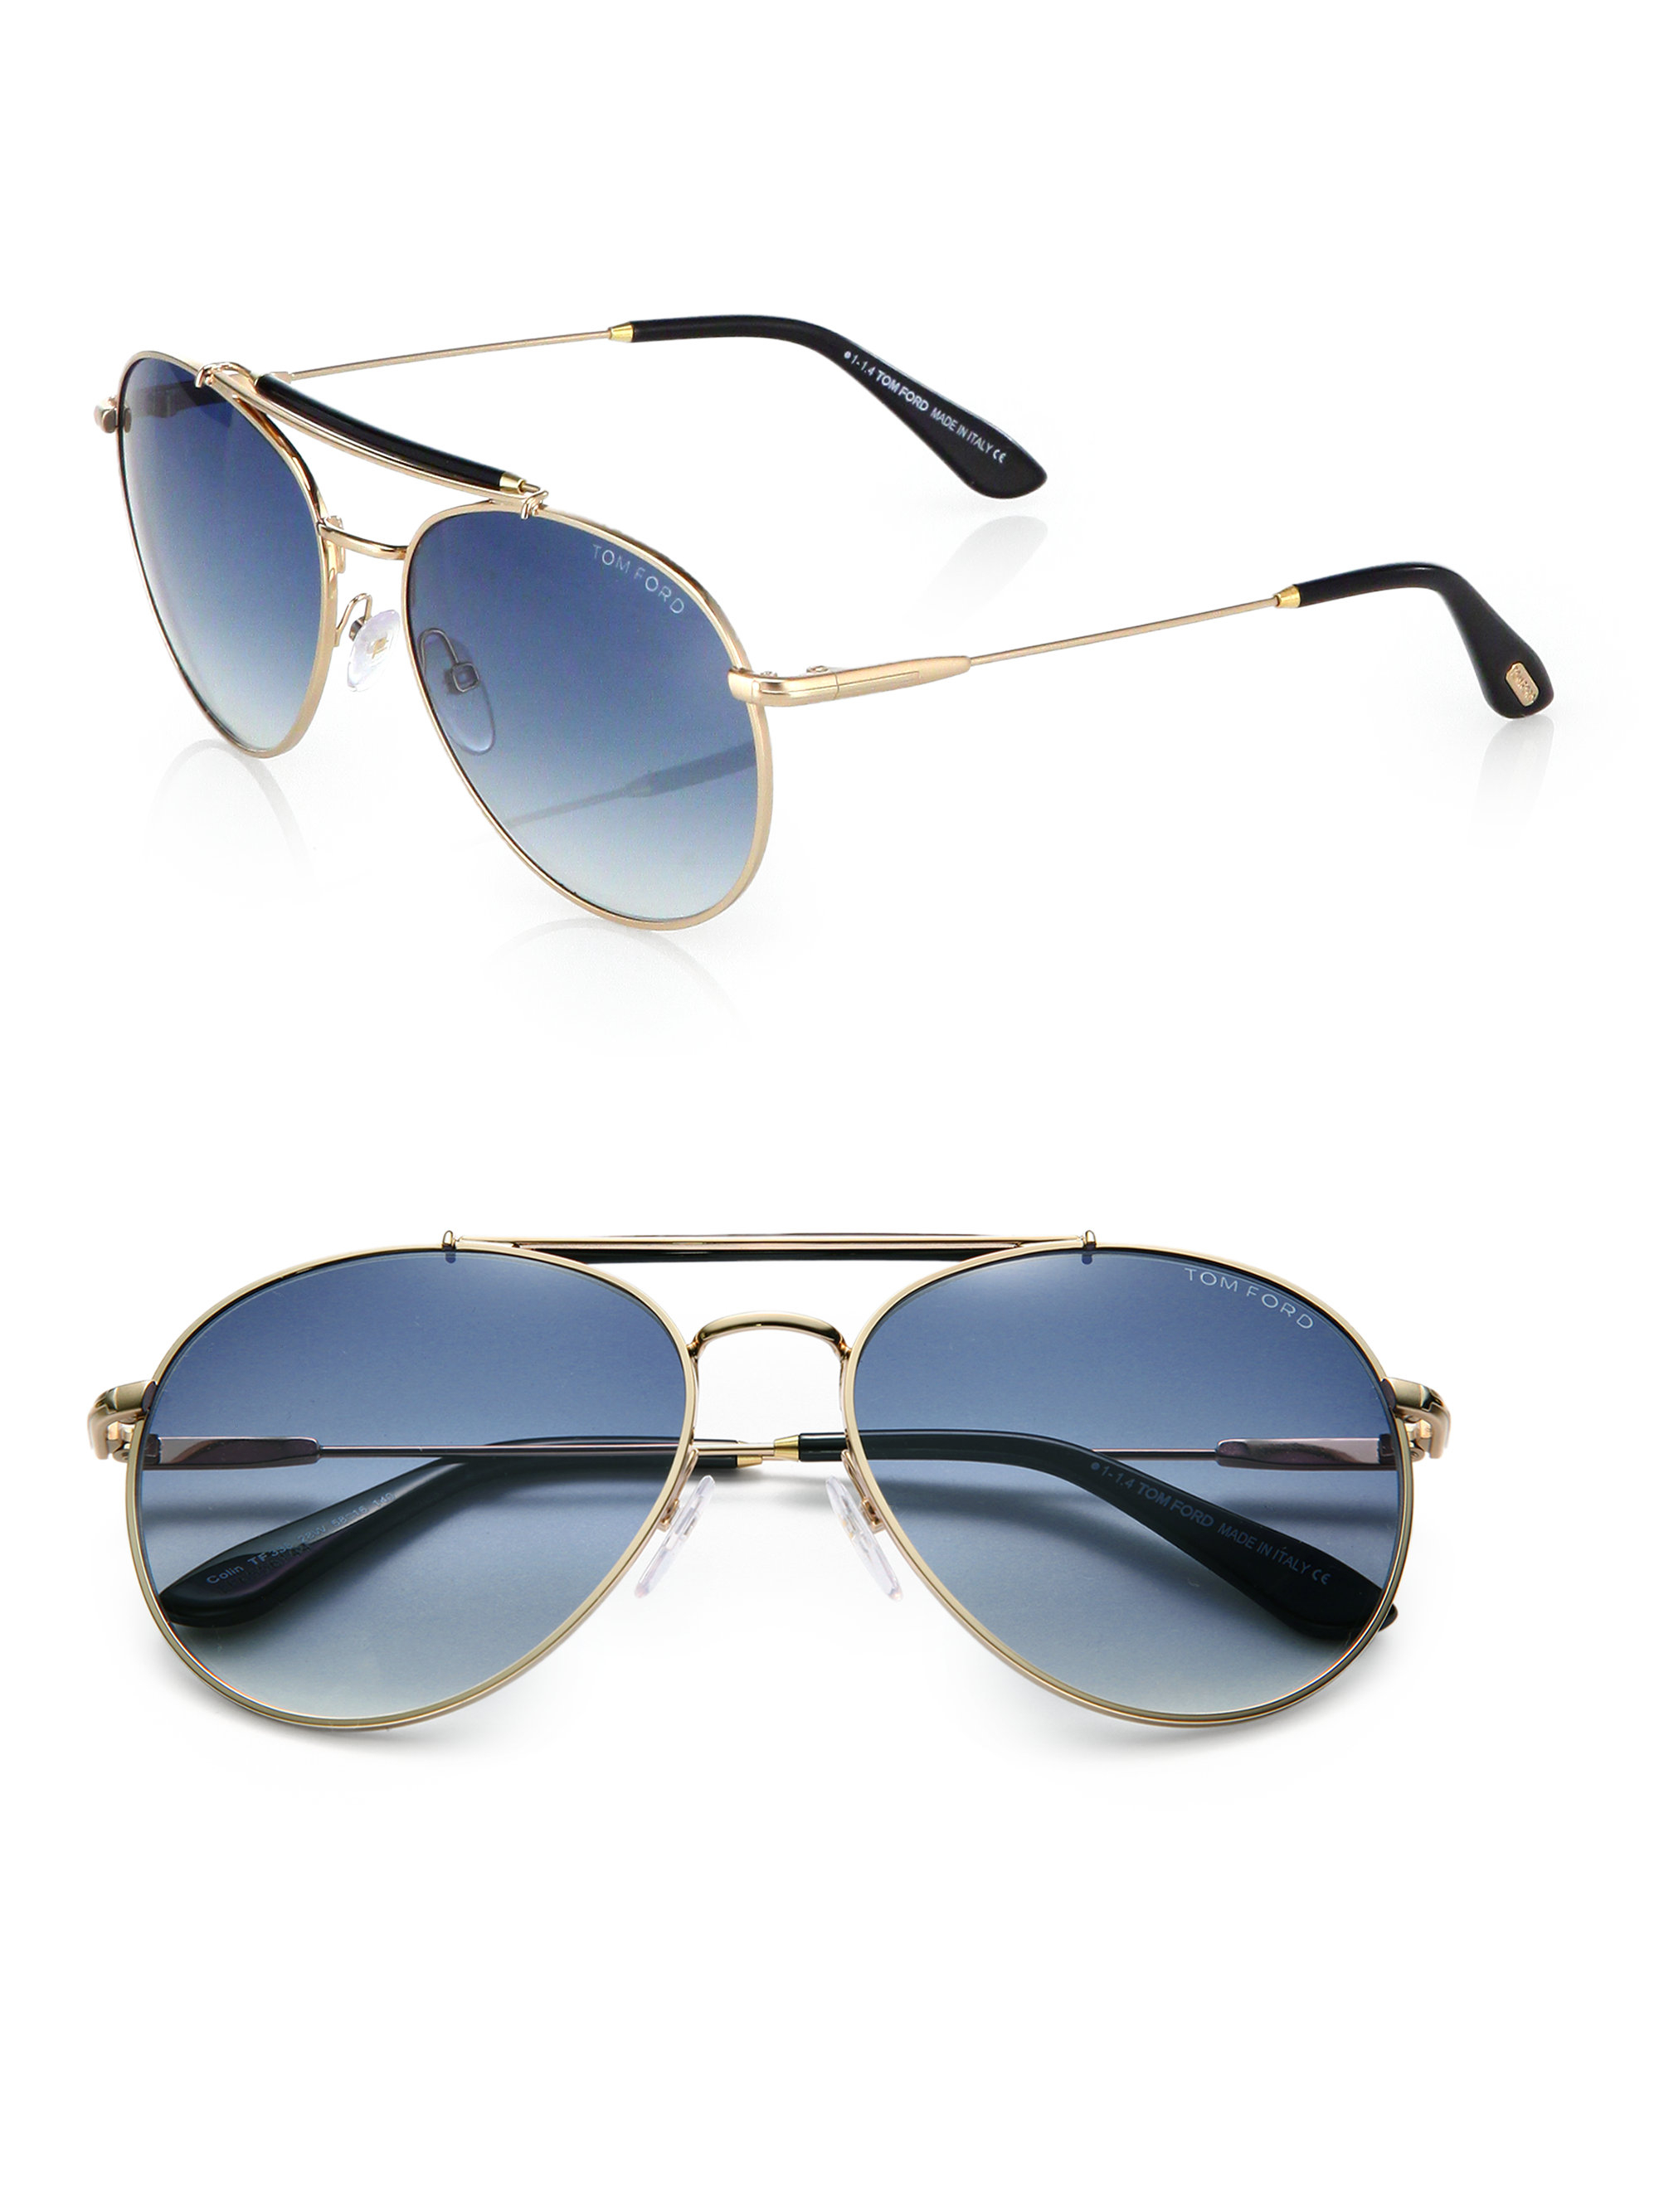 Tom Ford Colin Metal Aviator Sunglasses In Blue For Men Lyst 